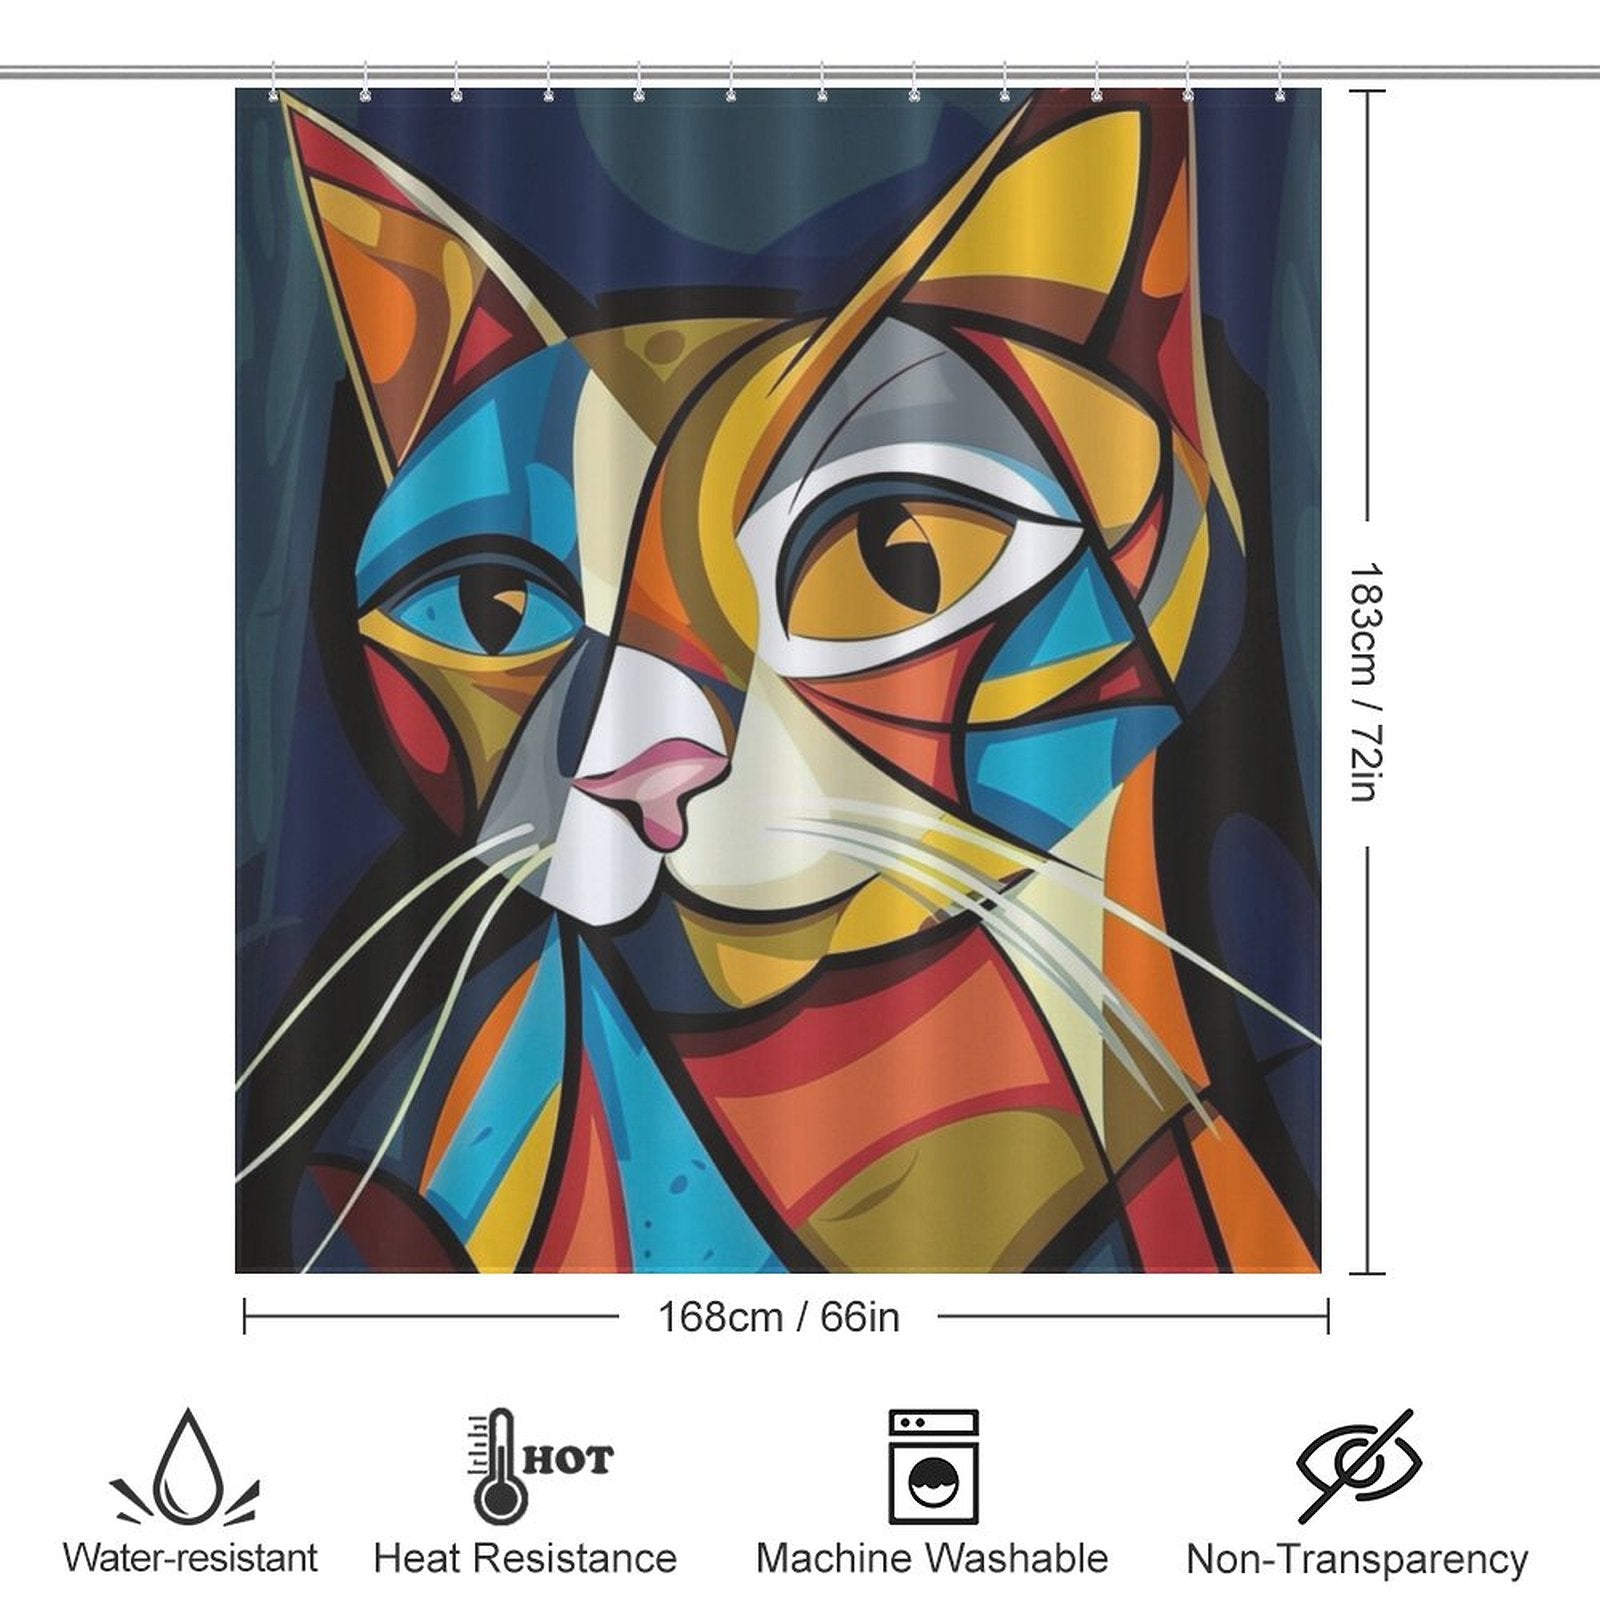 A colorful, abstract geometric cat illustration adorns this Cotton Cat Abstract Geometric Vintage Colorful Modern Art Minimalist Mid Century Cat Shower Curtain-Cottoncat with dimensions 183cm x 168cm. Icons indicate it is water-resistant, heat-resistant, machine washable, and non-transparent.